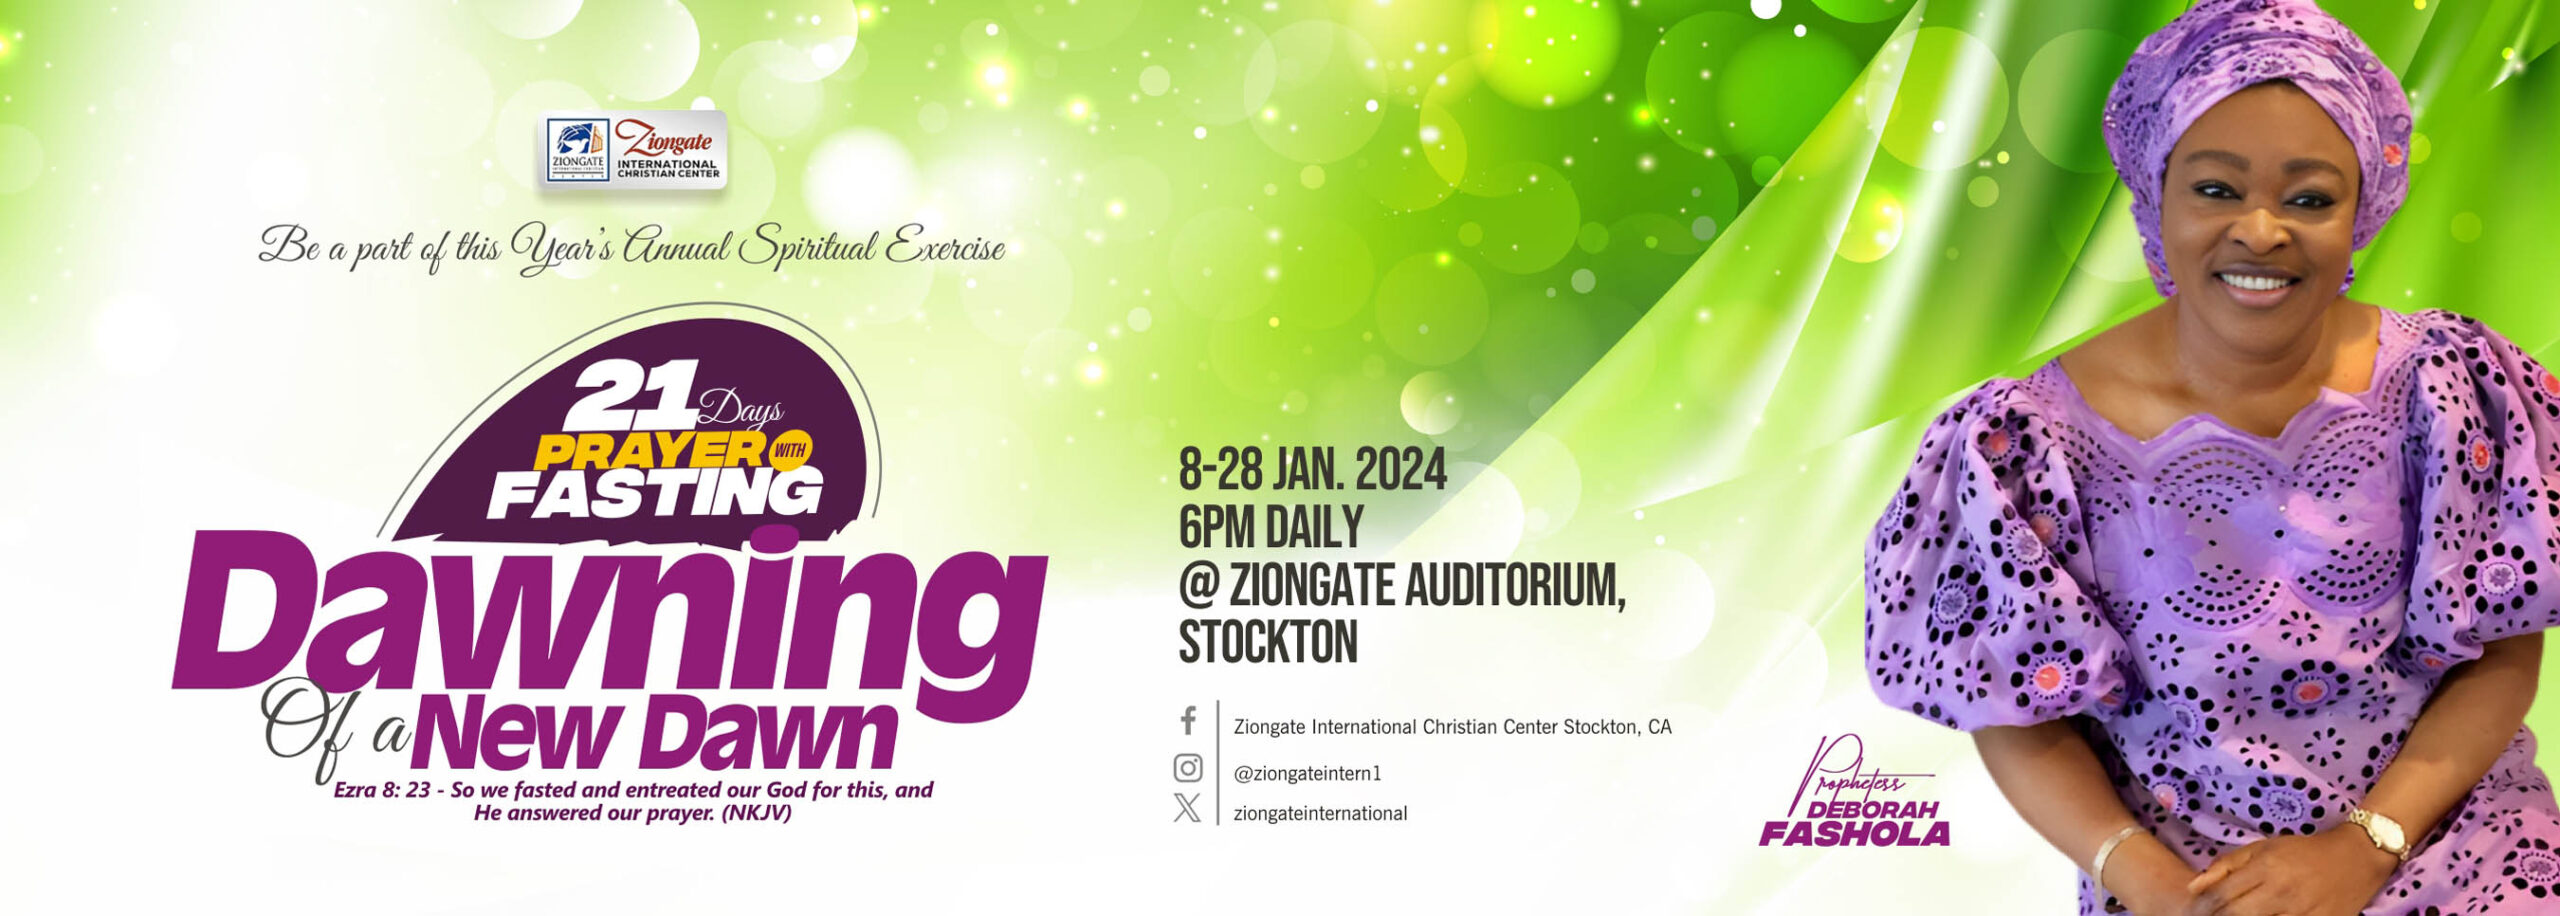 21 Days Fasting with Prayer - Dawning of a New Dawn - ZICC Ziongate International Christian Centre